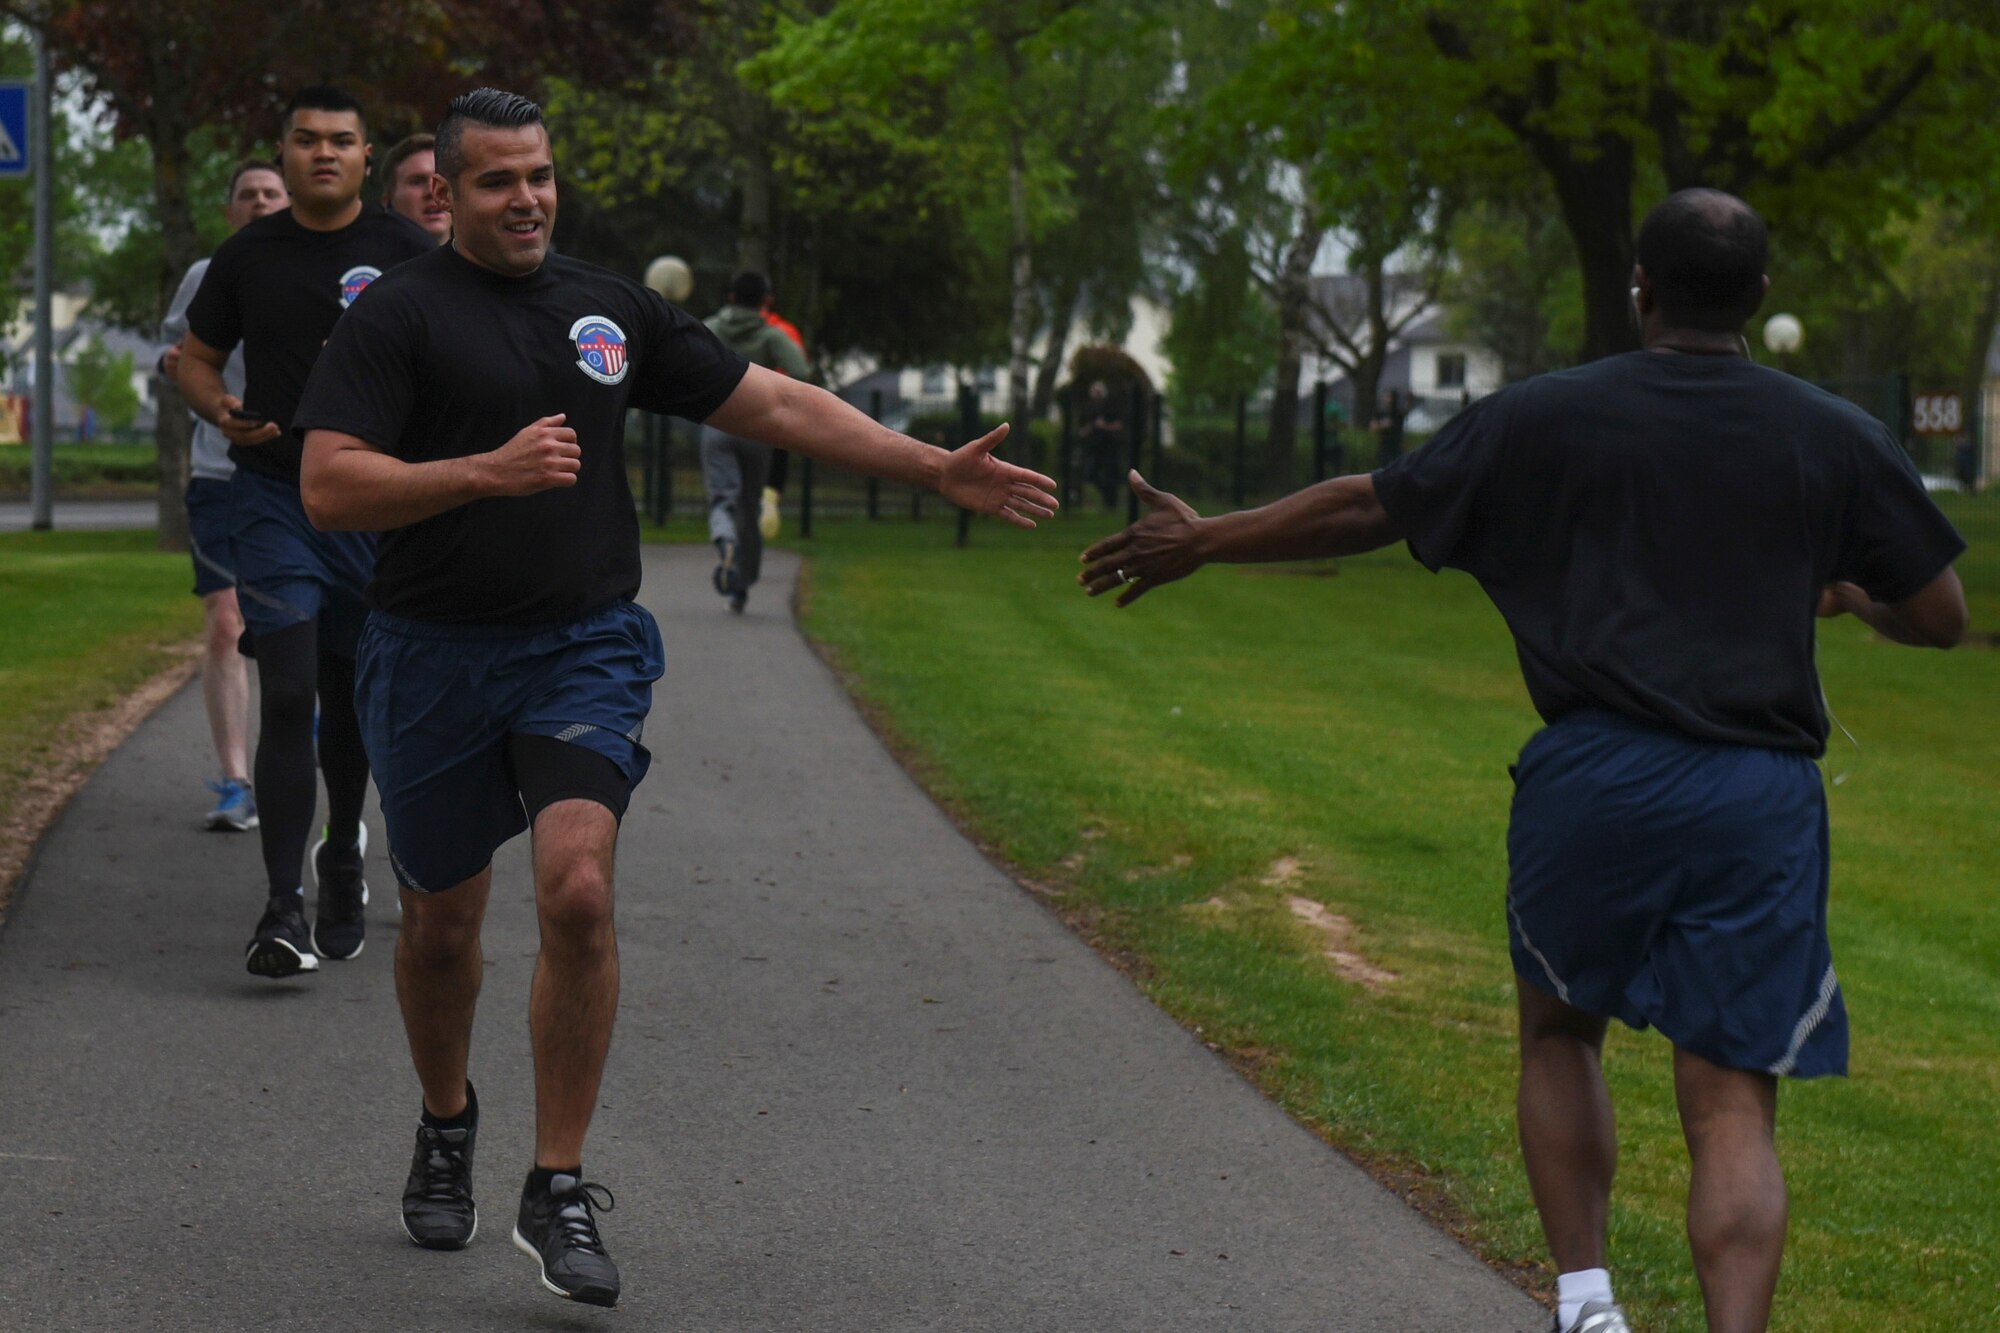 U.S. Tech. Sgt. Louis Almaguer, 52nd Civil Engineer Squadron NCO in charge of execution support and TSgt. Bruce Holden, 52nd CES NCOIC of service contracts, during a National Police Week memorial 5K run at Spangdahlem Air Base, Germany, May 19, 2017. The run was the last event during National Police Week held at the base to honor the bravery and sacrifices of the men and women who serve as police officers. (U.S. Air Force photo by Senior Airman Dawn M. Weber)